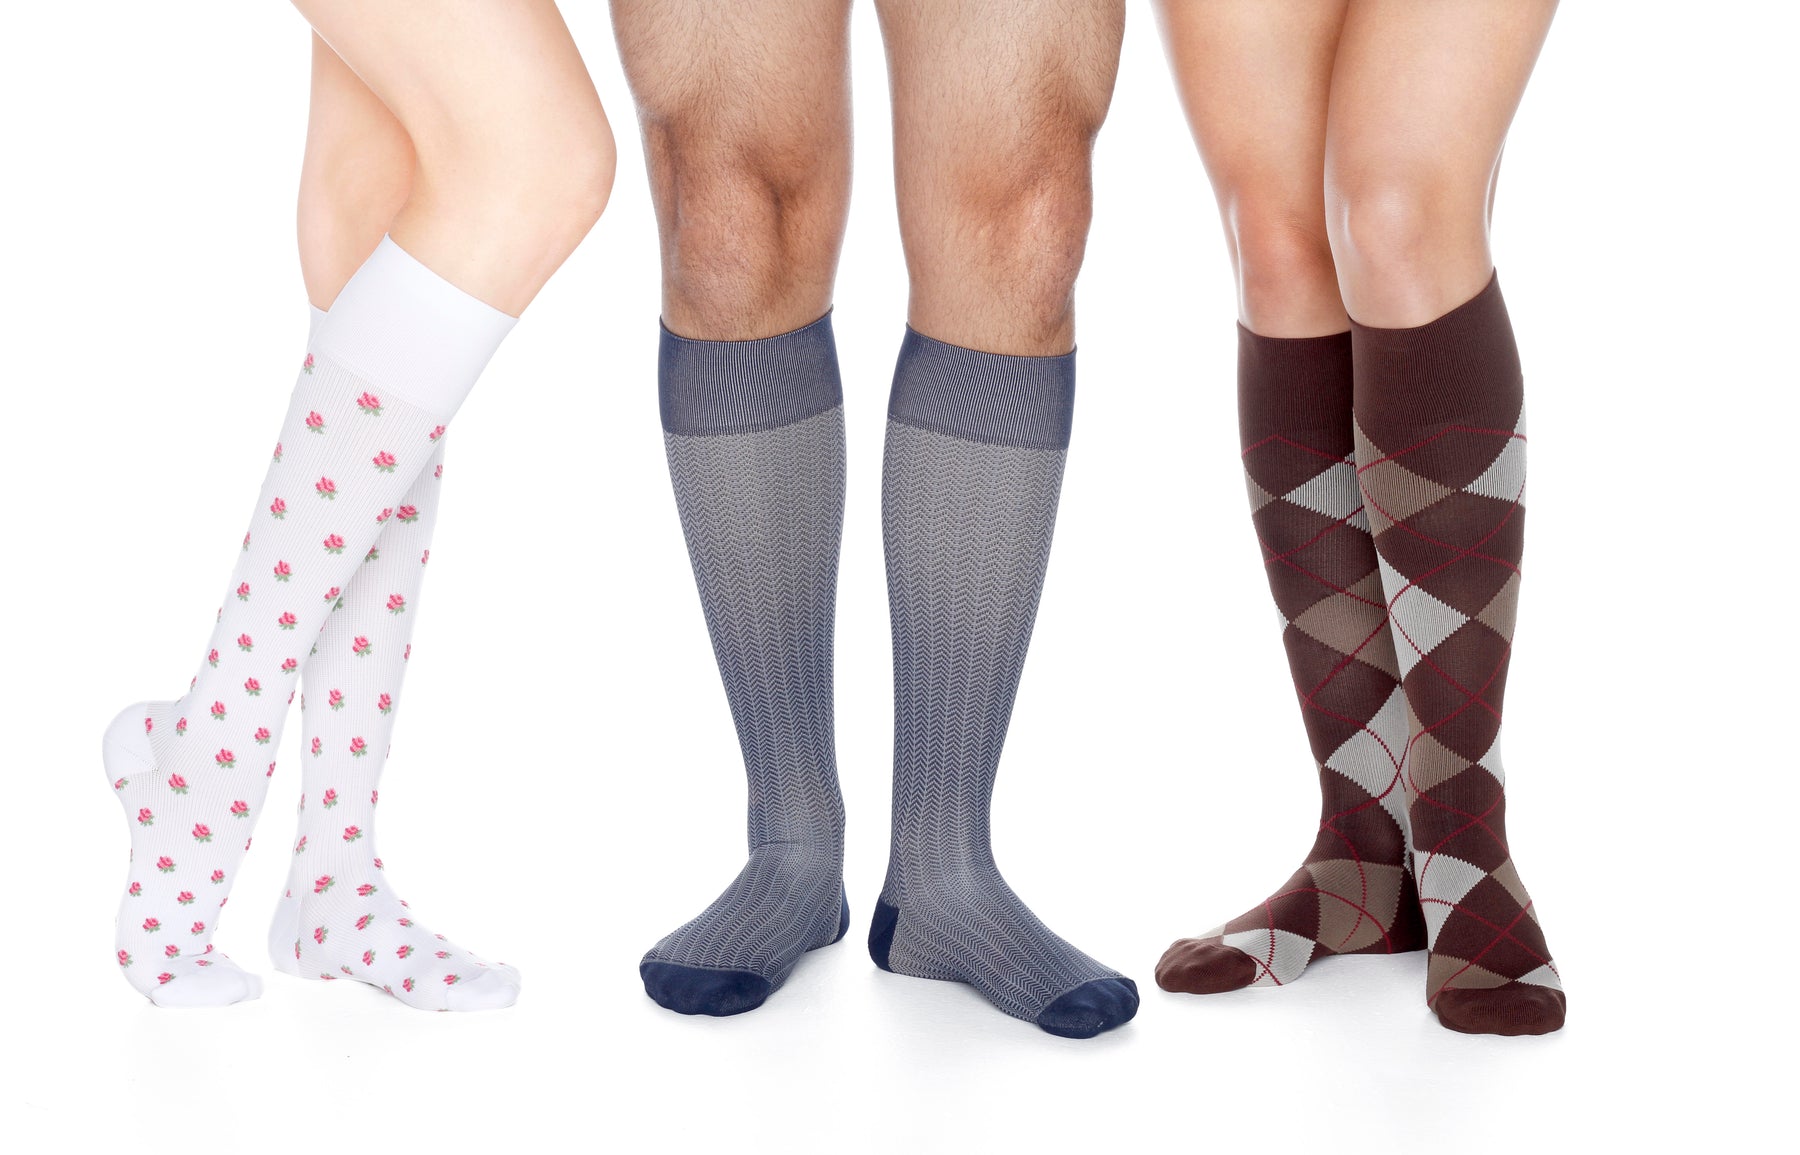 10 Reasons You Should Wear Compression